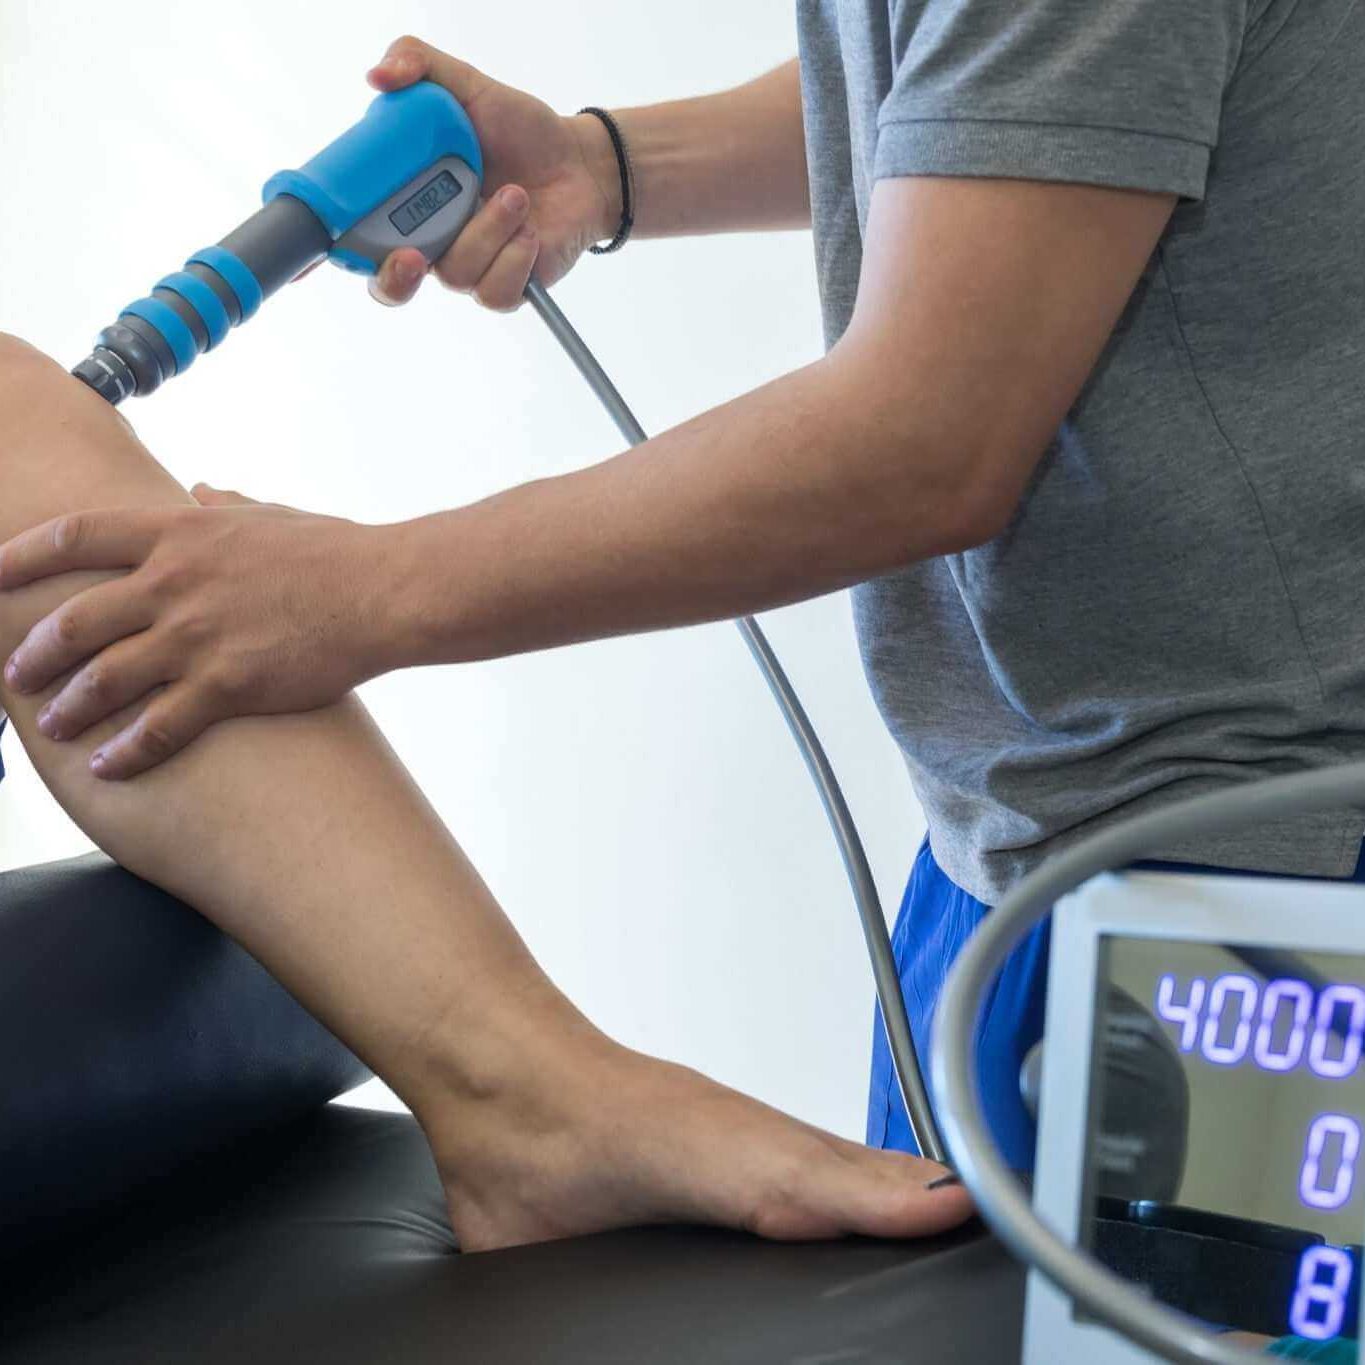 shock wave therapy